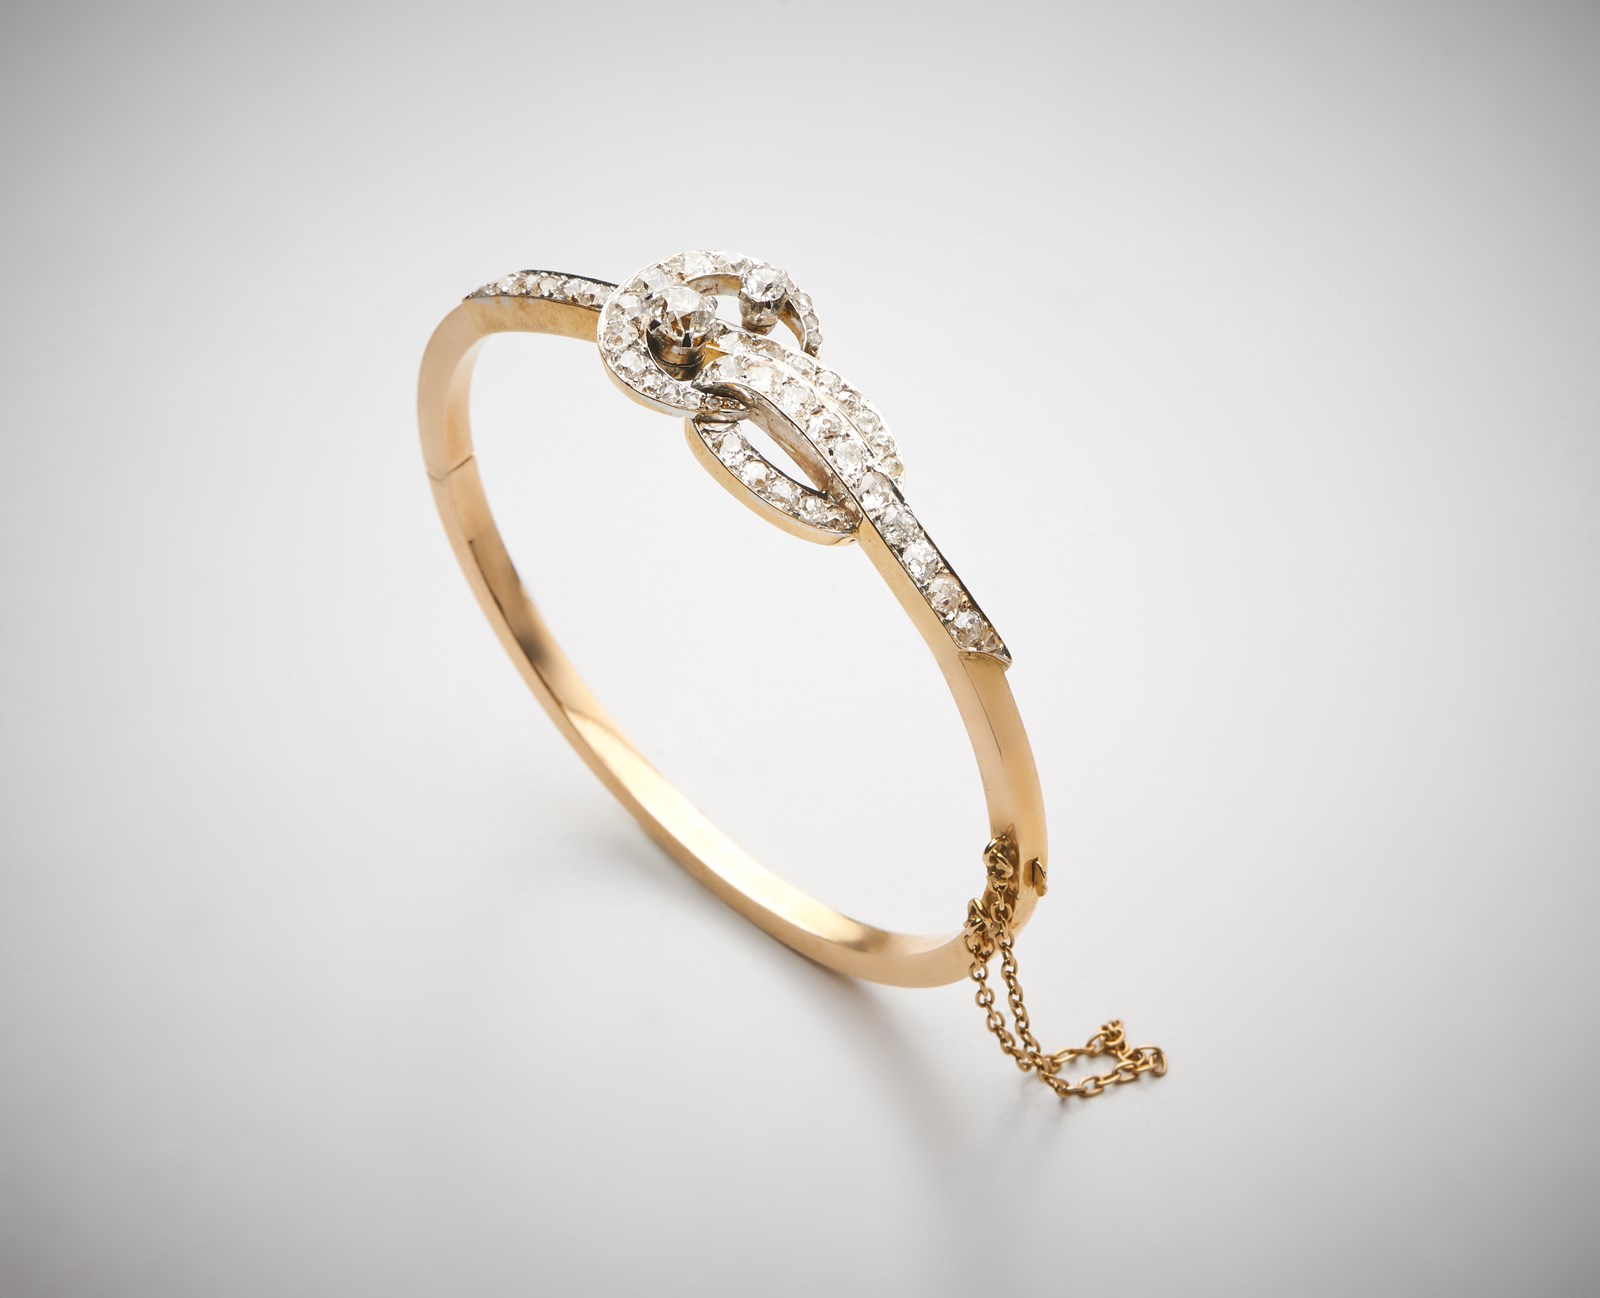 Rigid cuff bracelet in yellow gold 750/1000 with diamonds antique cut of about 3.50 carats.   (. )